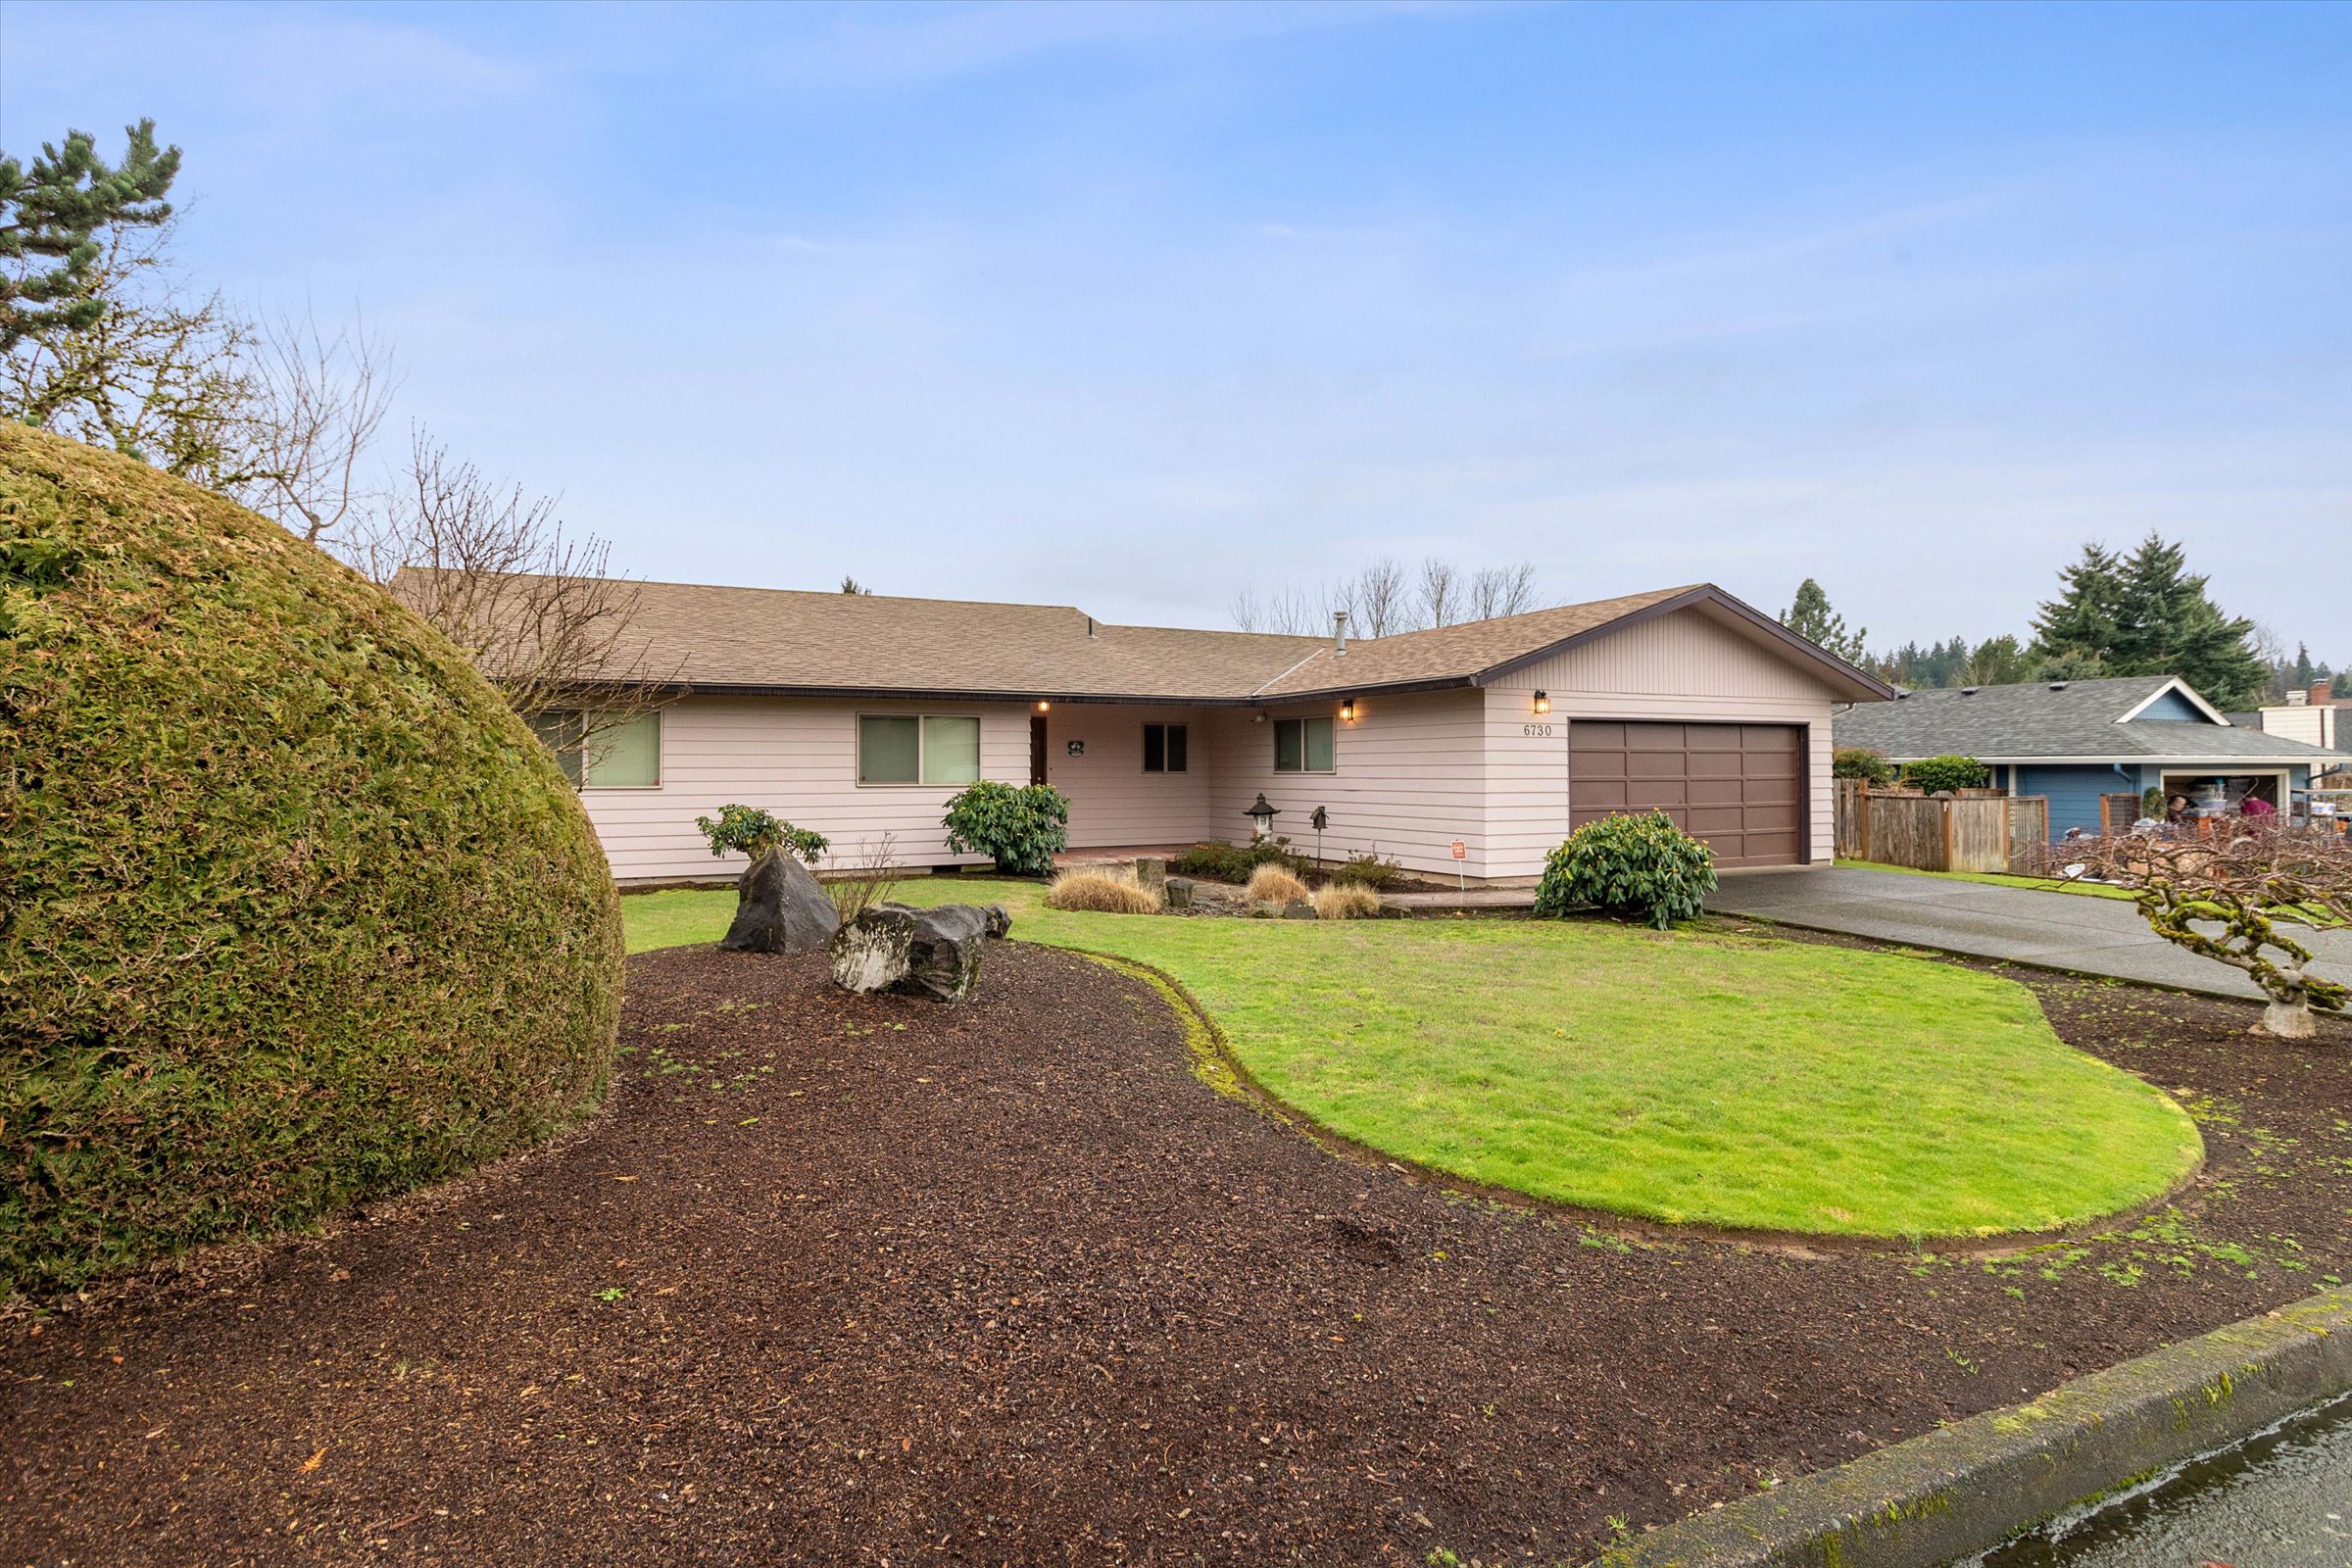 Now Available! 6730 SE Tuscany Ct, Milwaukie 97267. Offered for $535,000